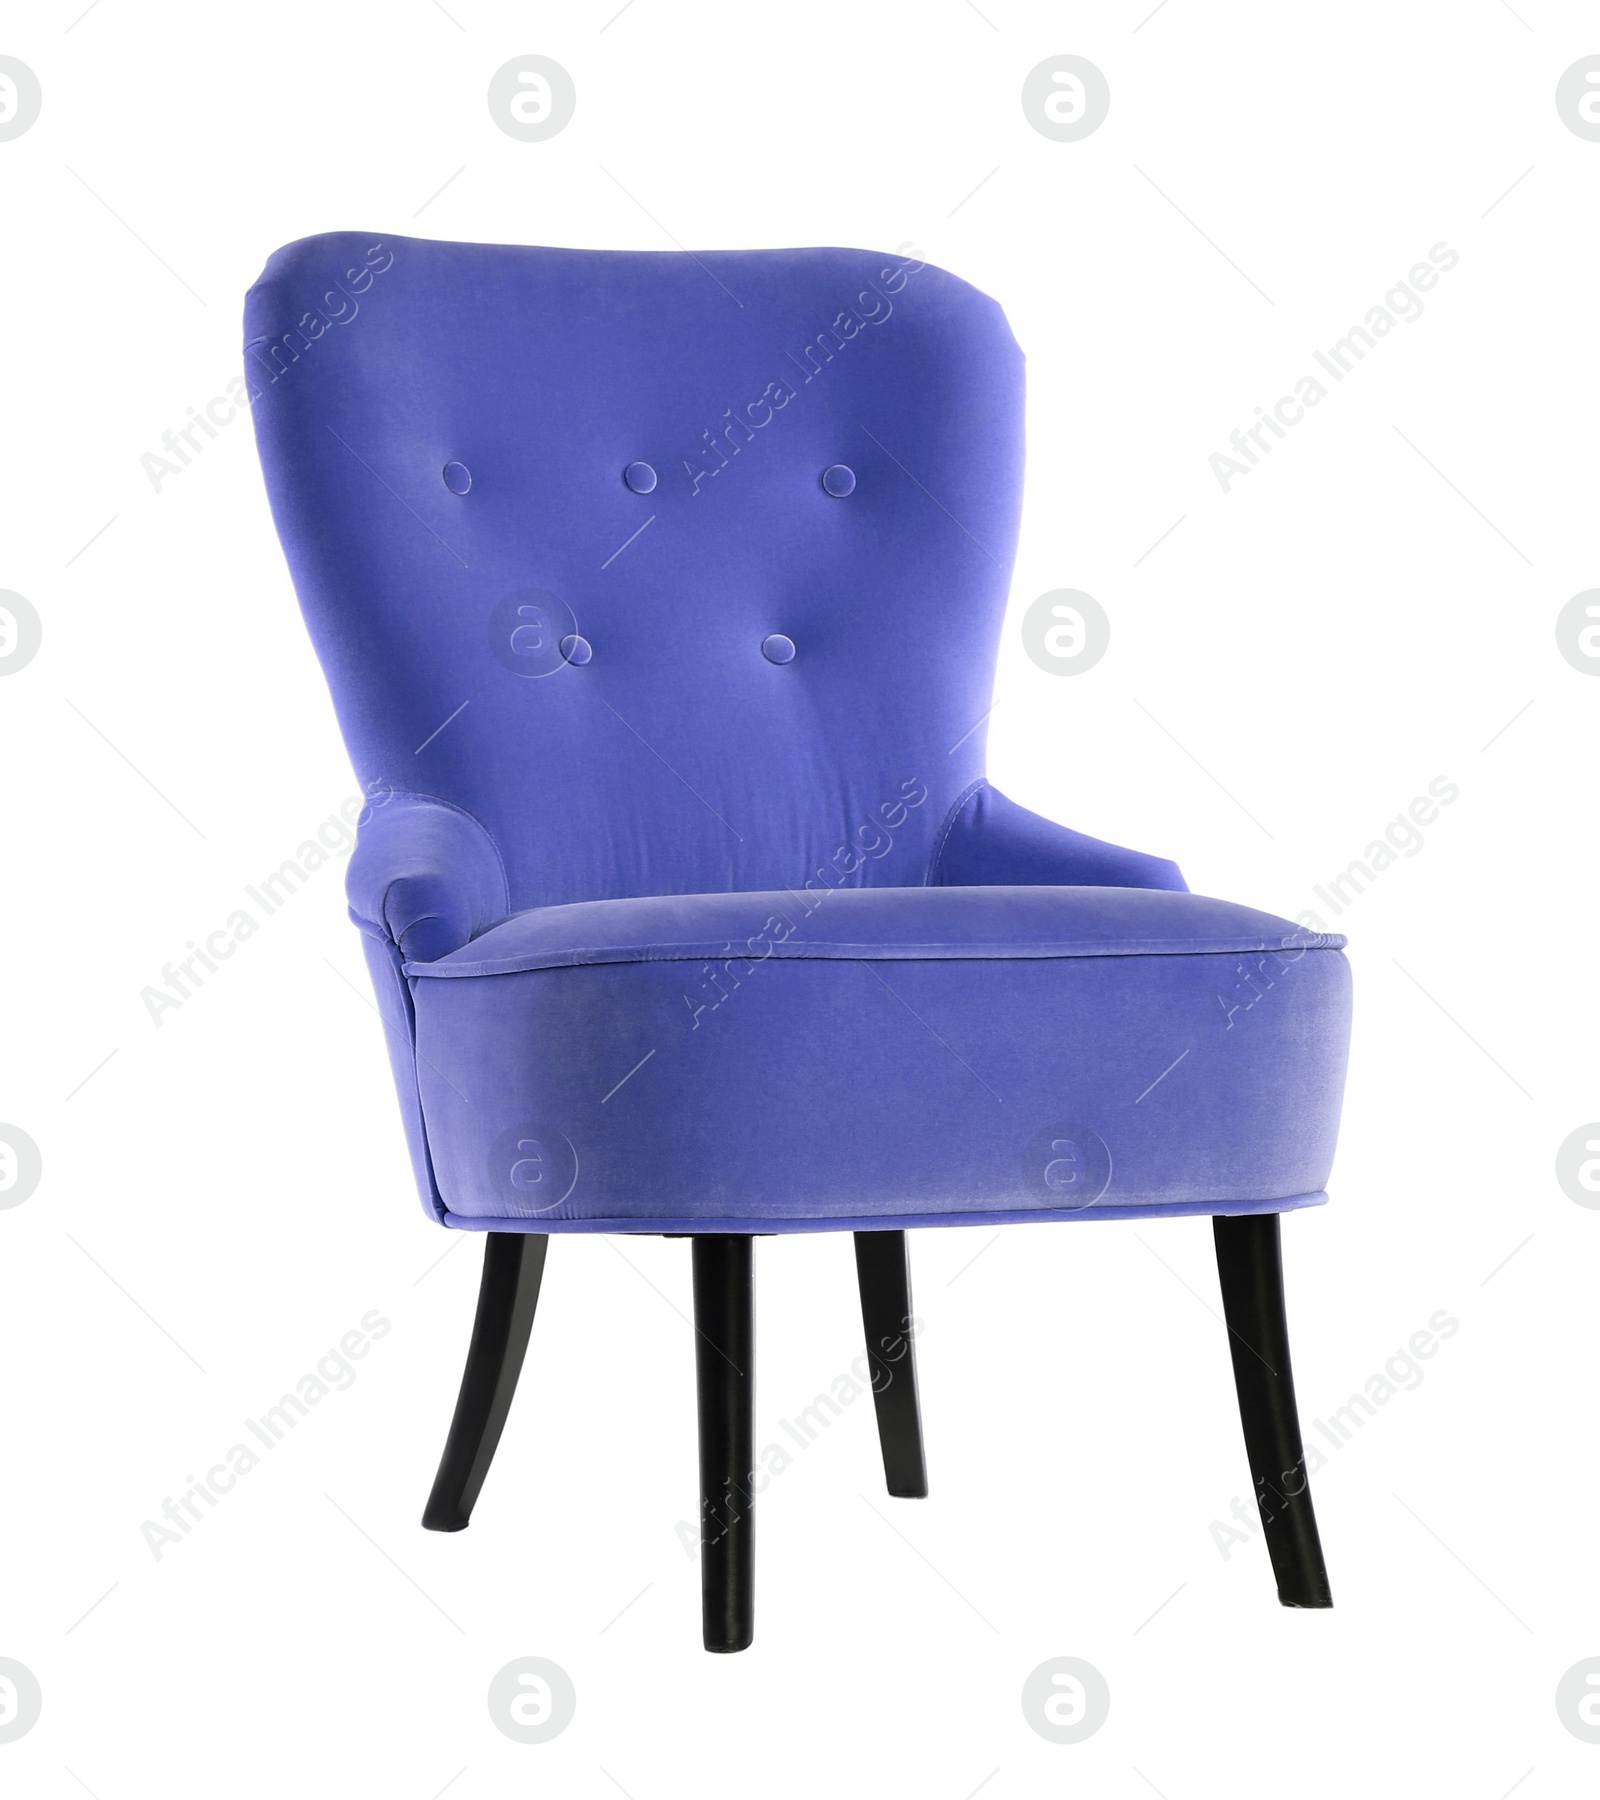 Image of One comfortable blue violet armchair isolated on white